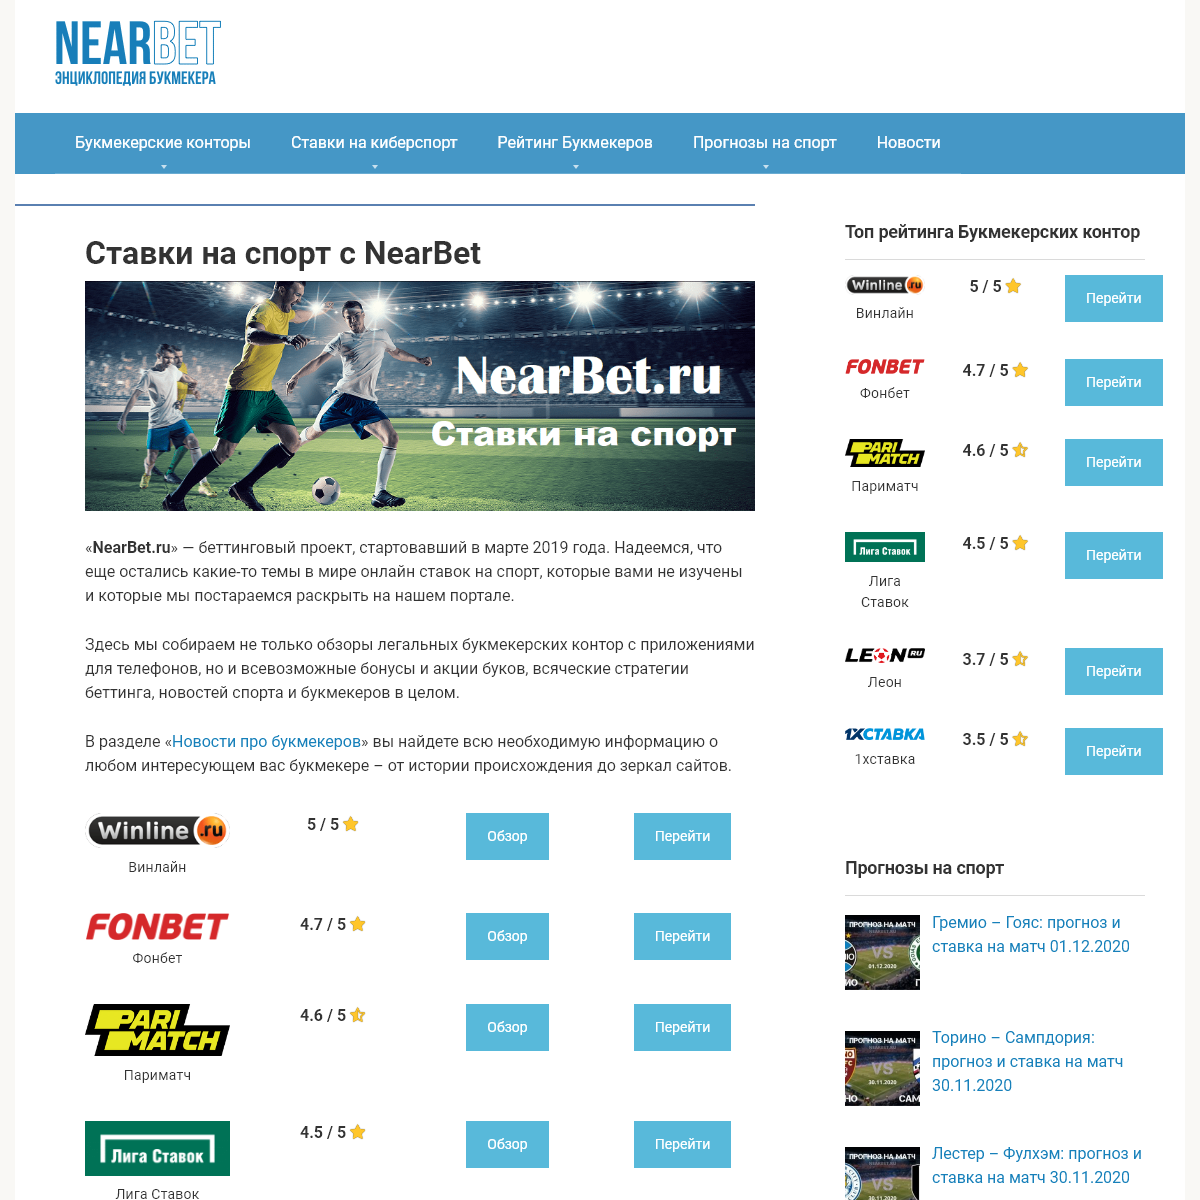 A complete backup of nearbet.ru